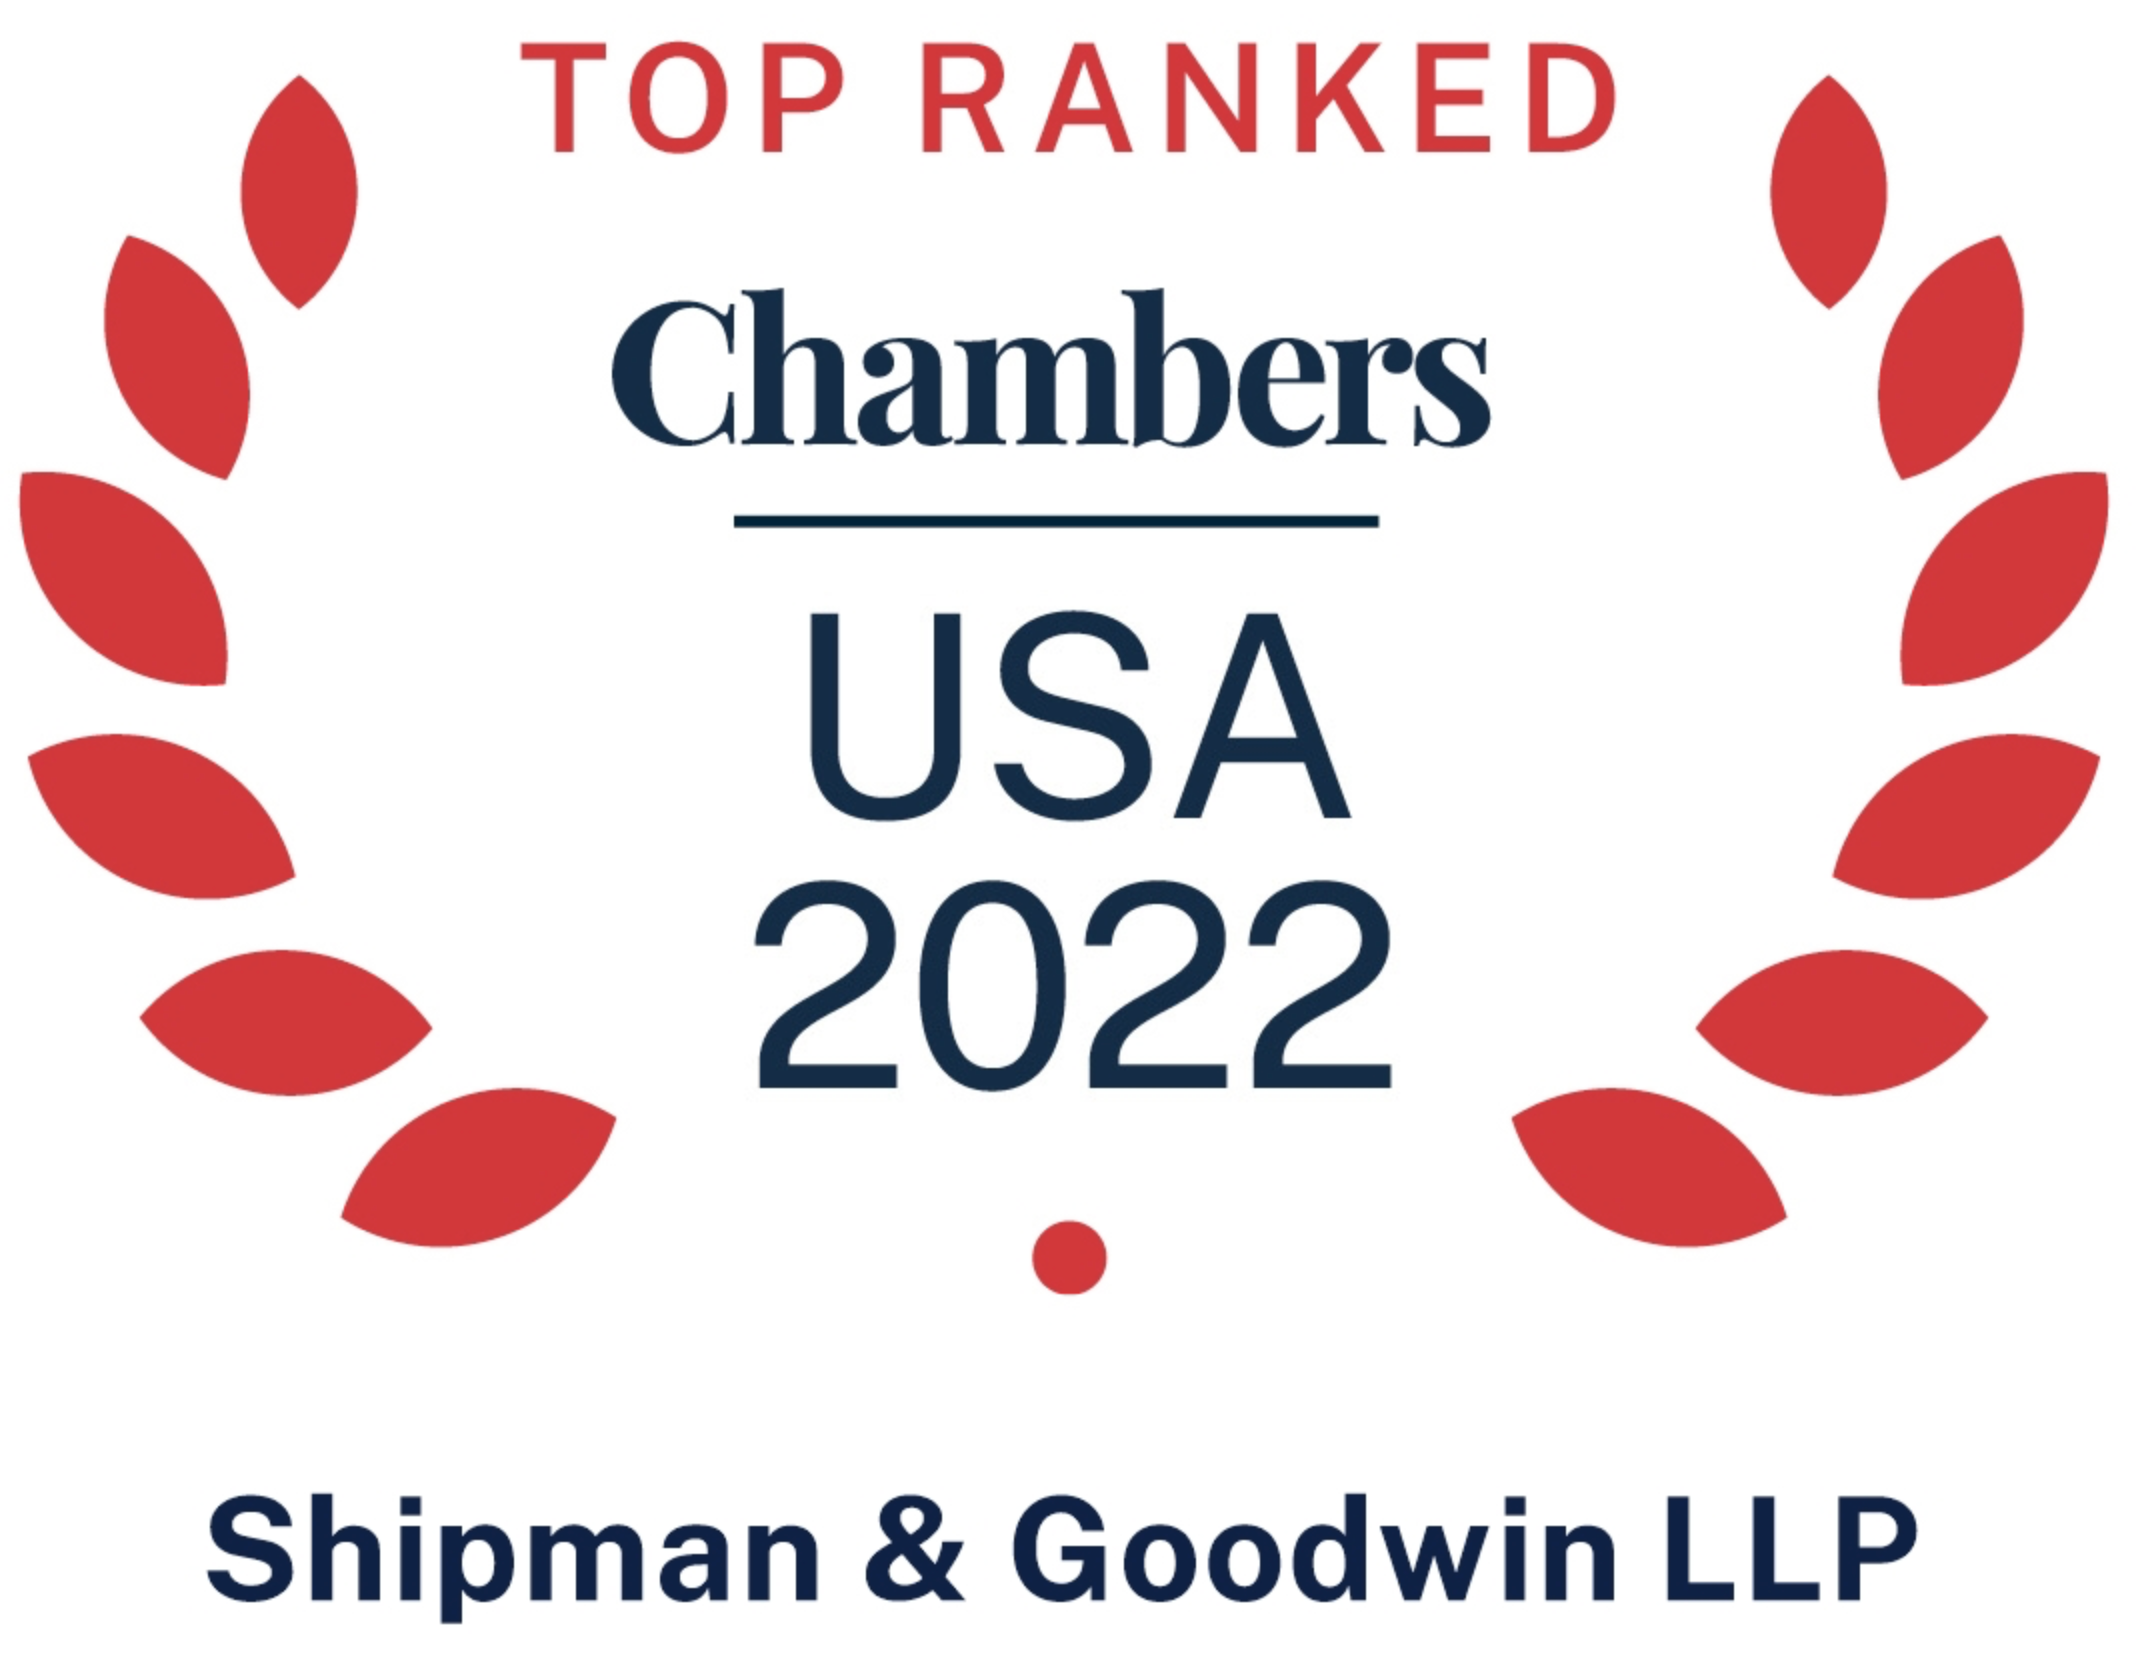 chambers use top law firm badge image Shipman & Goodwin LLP